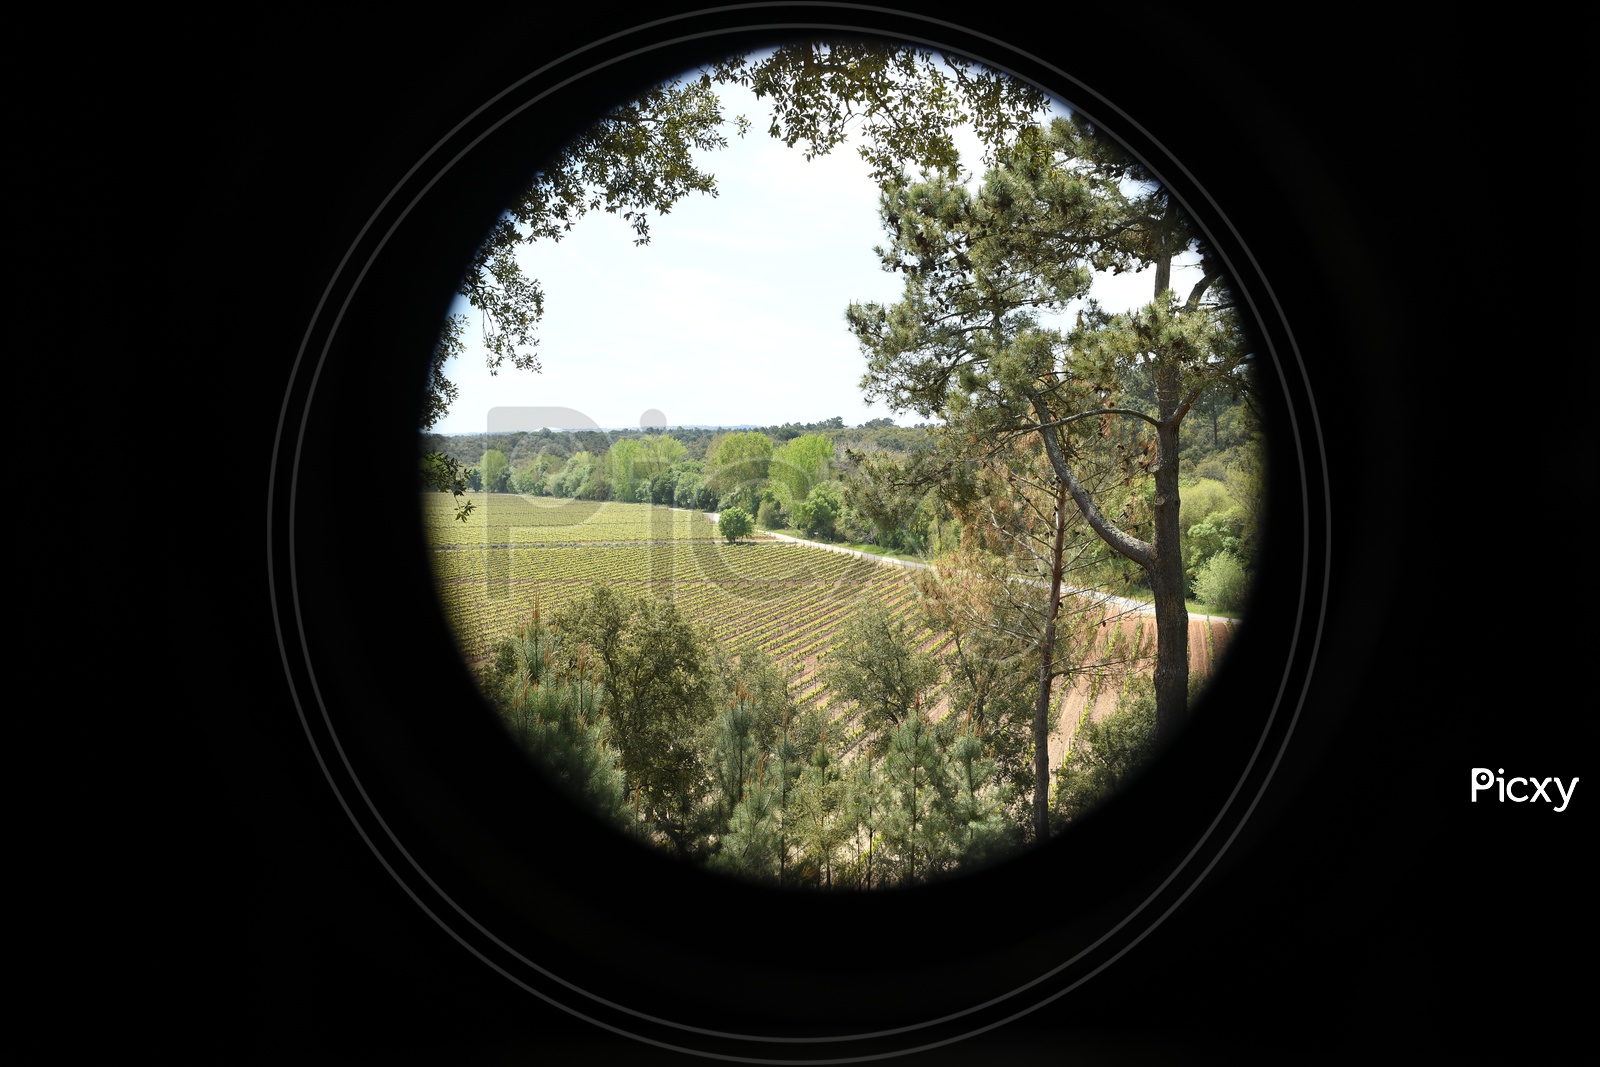 A View of Agricultural Fields In an Vintage Camera Frame